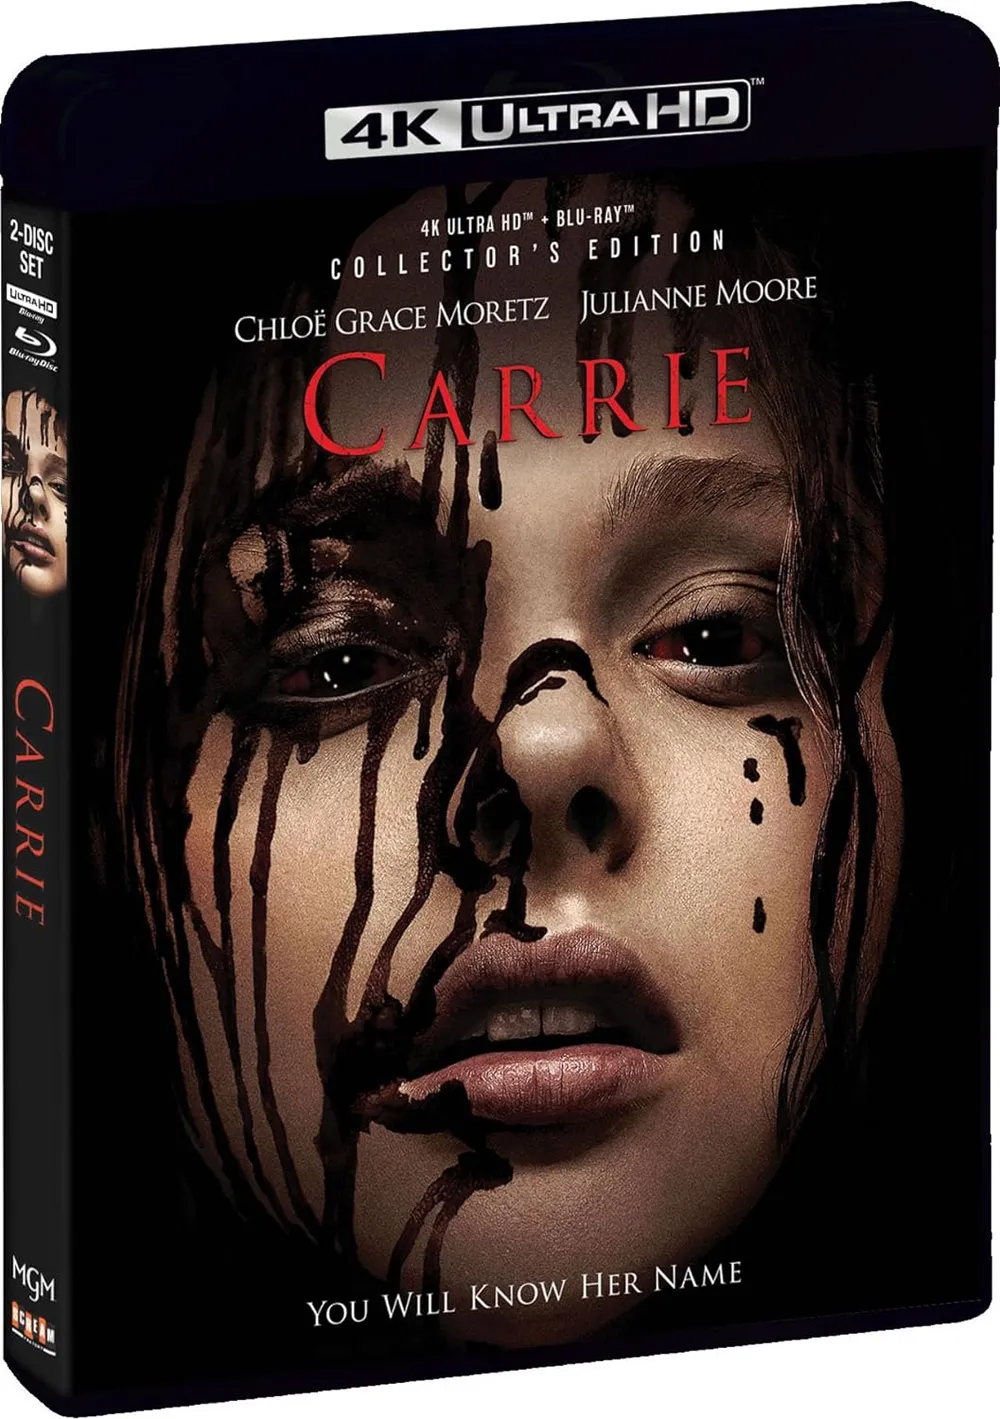 'Carrie (2013)' 4K UHD Blu-ray Detailed by Scream Factory